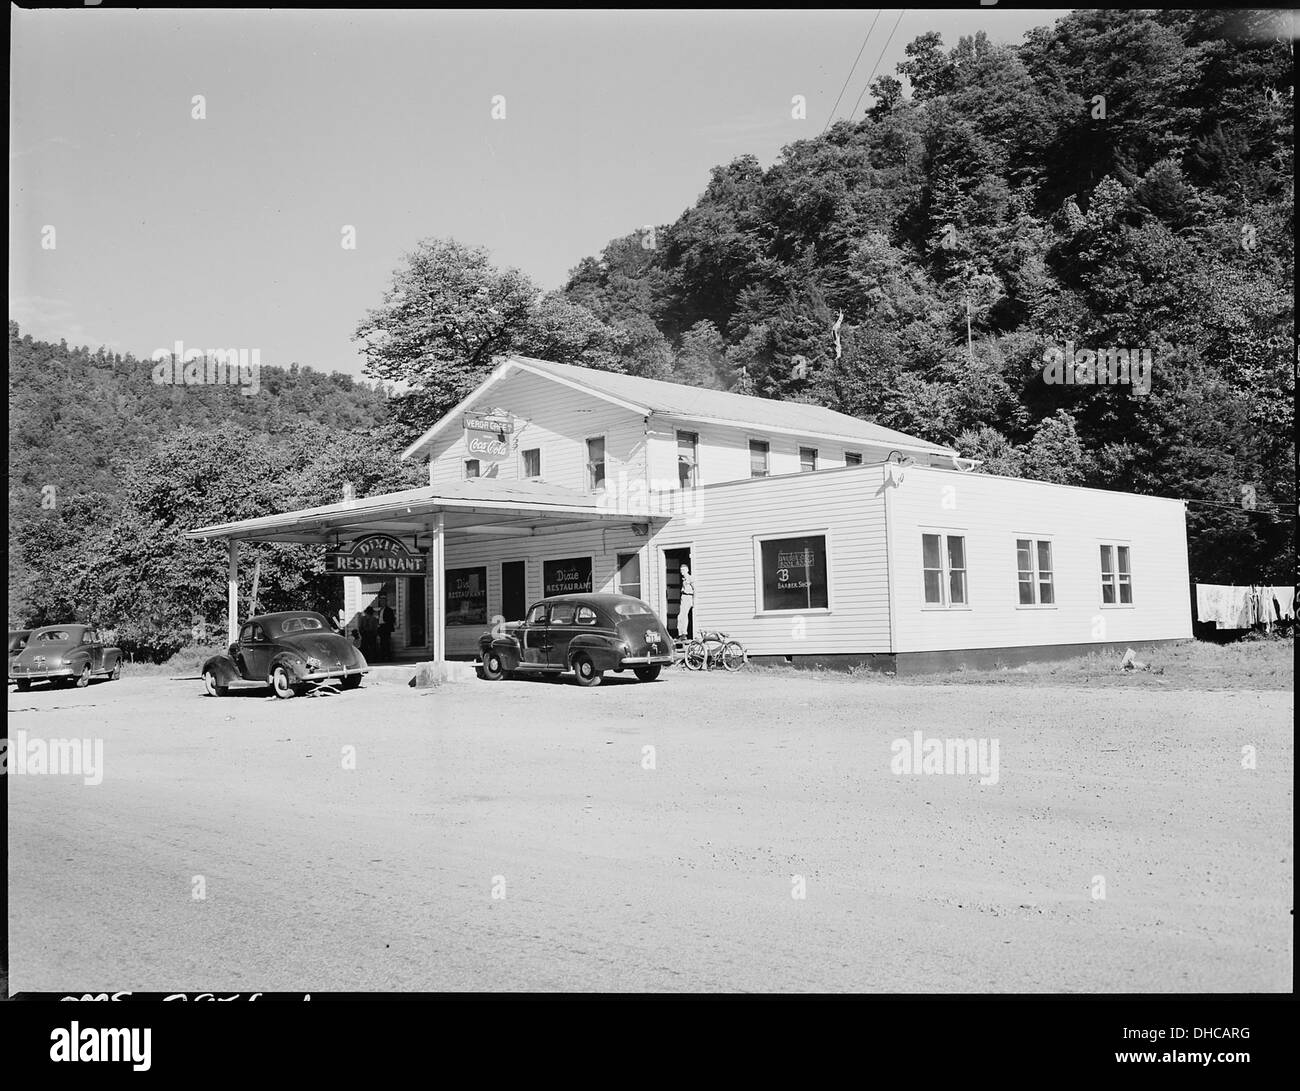 Restaurant which is down the road from the coal camp, this is not on company property. Lejunior, Harlan County... 541385 Stock Photo